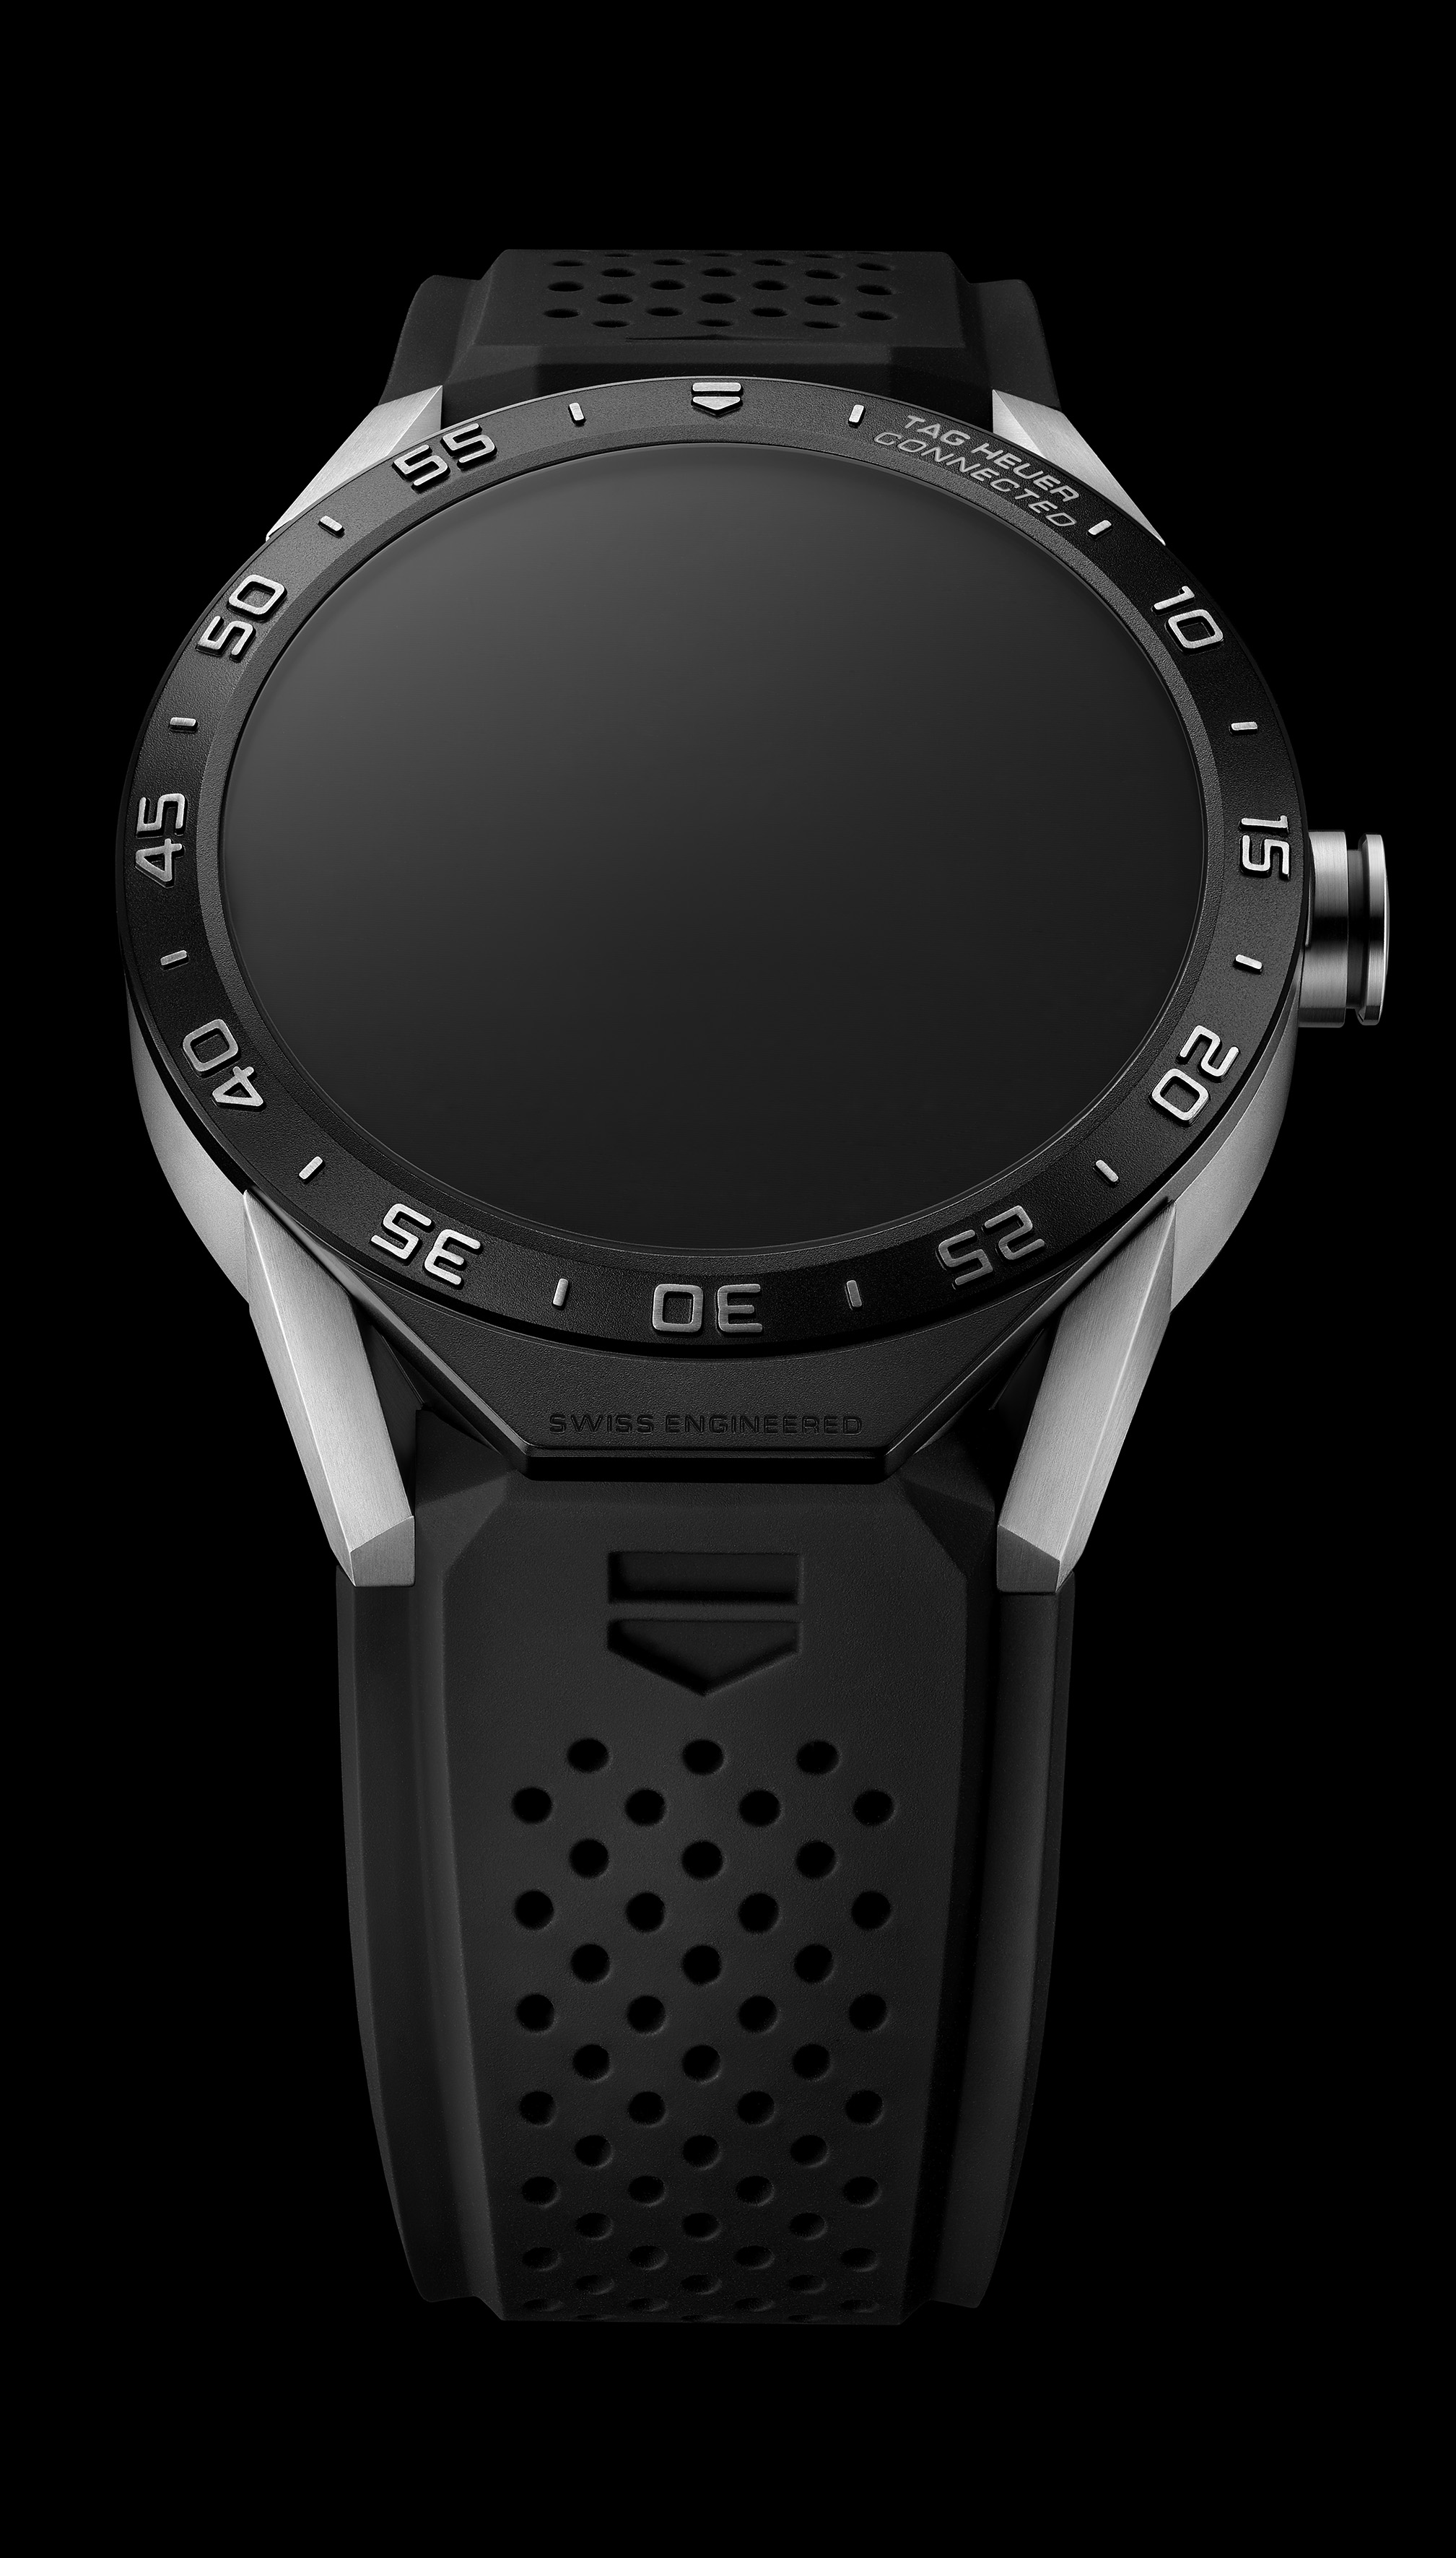 SAR8A80.FT6045 TH CONNECTED PACKSHOT 2015 - BLACK STRAP - DIAL OFF